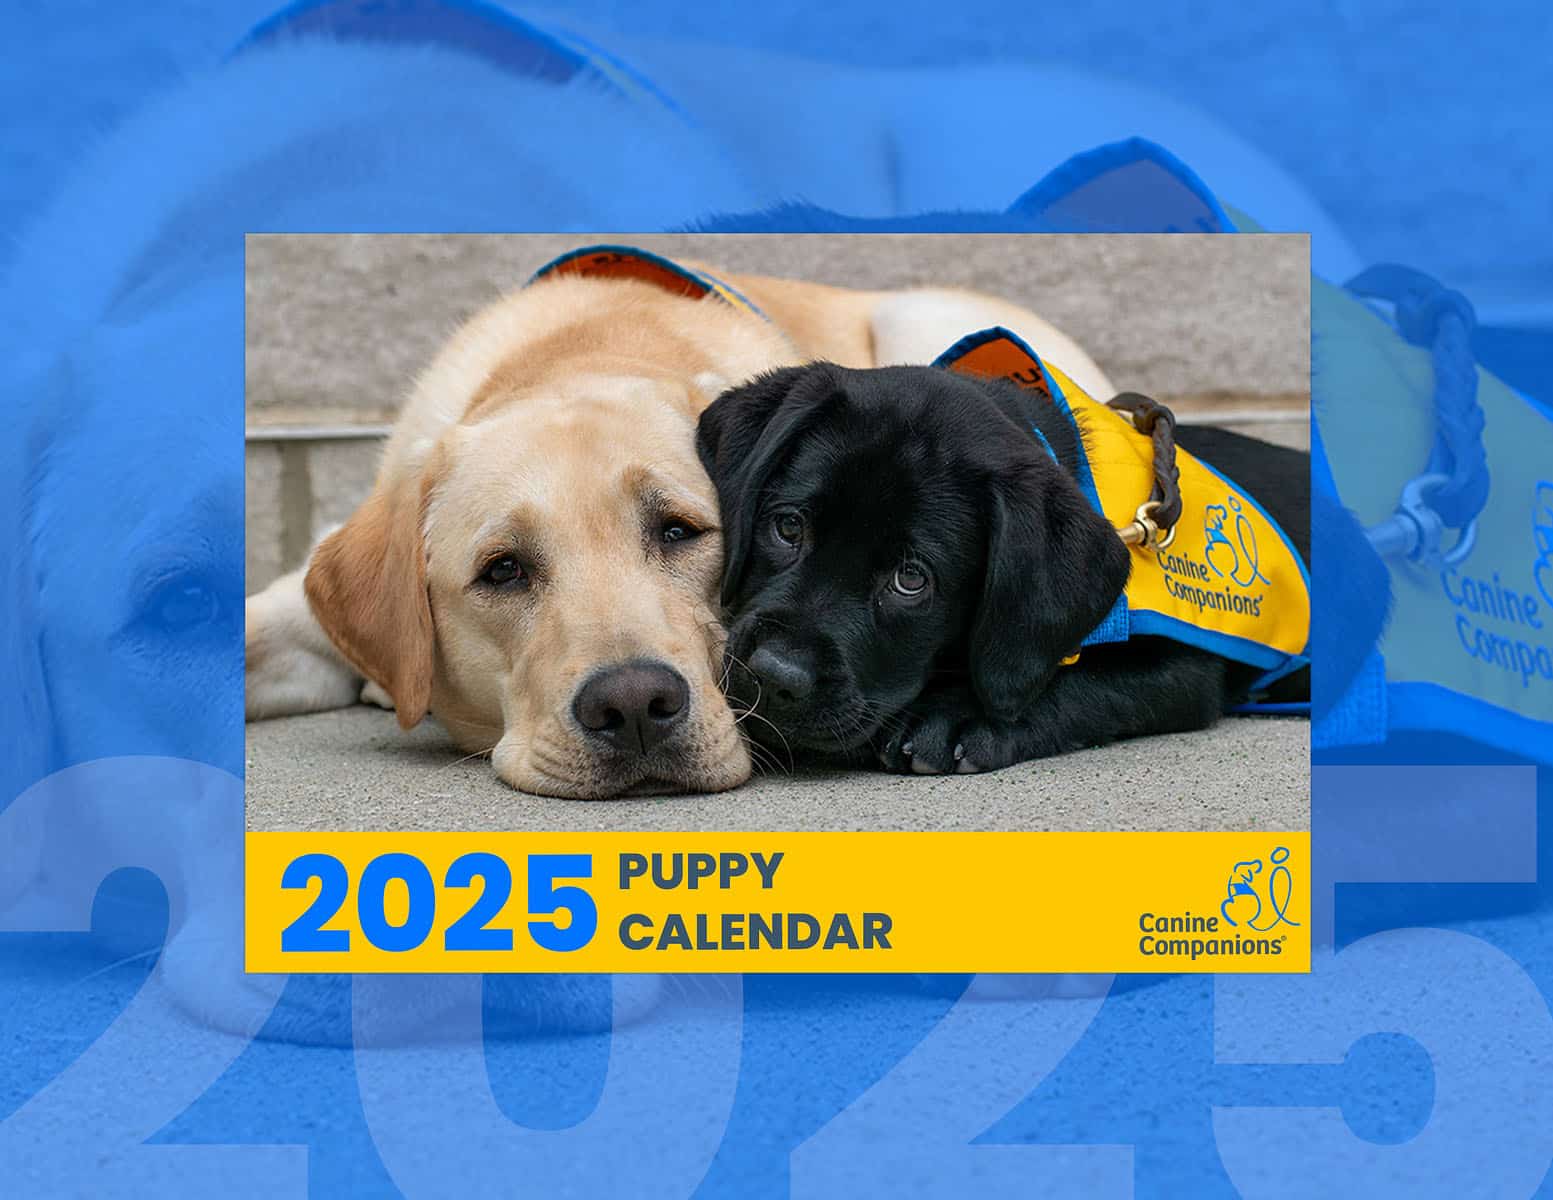 2025 Puppy Calendar cover featuring an adult yellow Labrador retriever and a black Labrador puppy, both wearing Canine Companions vests, lying together.